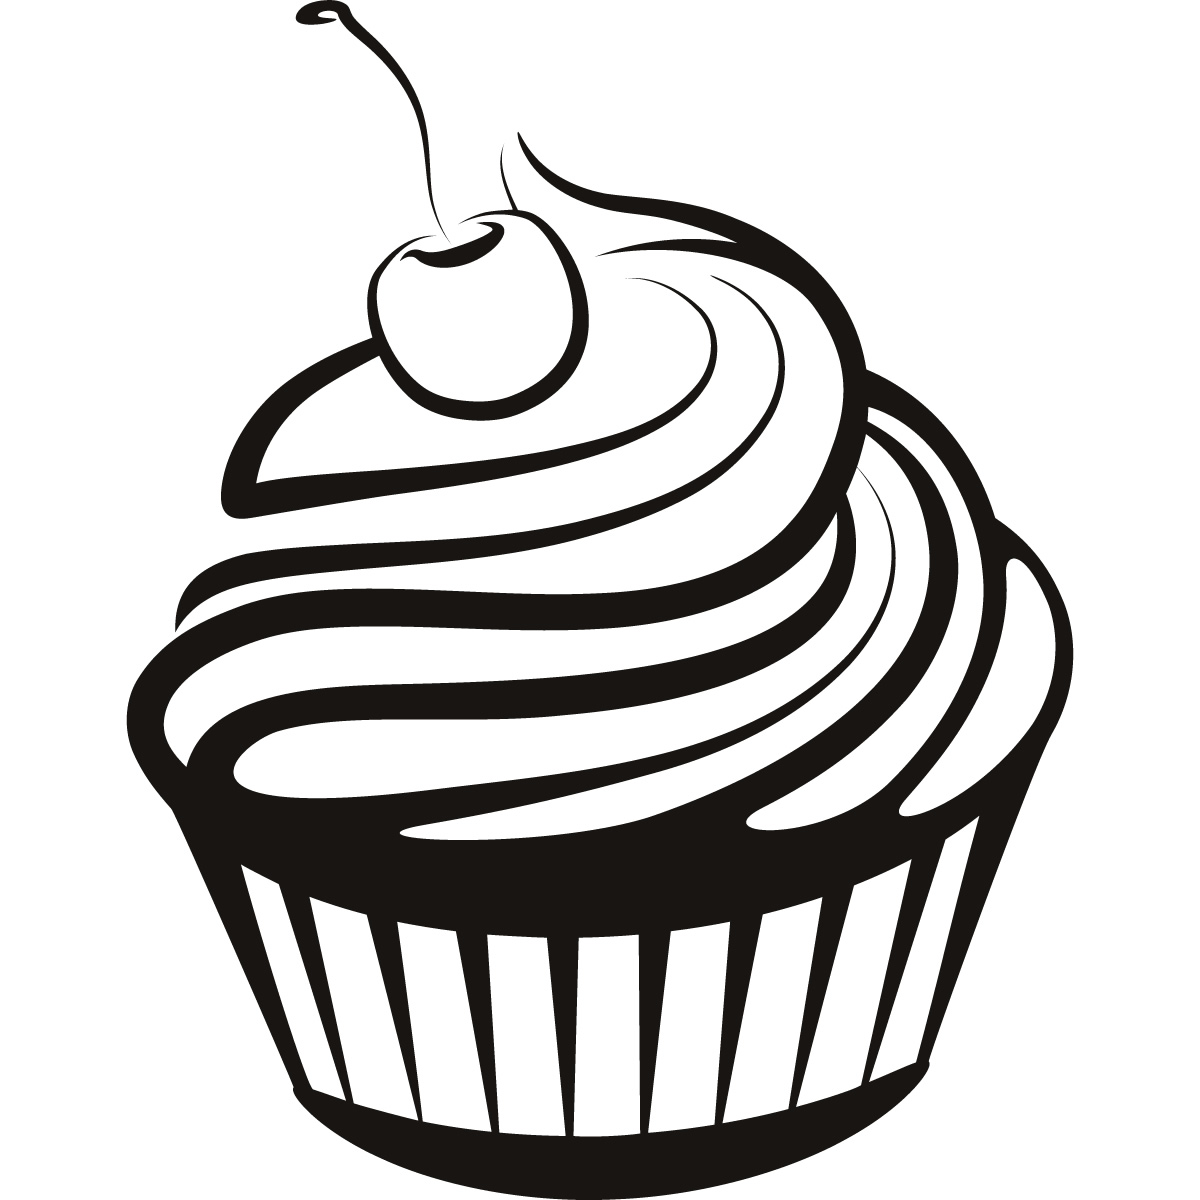 21 Cupcake Line Drawing Free Cliparts That You Can Download To You    